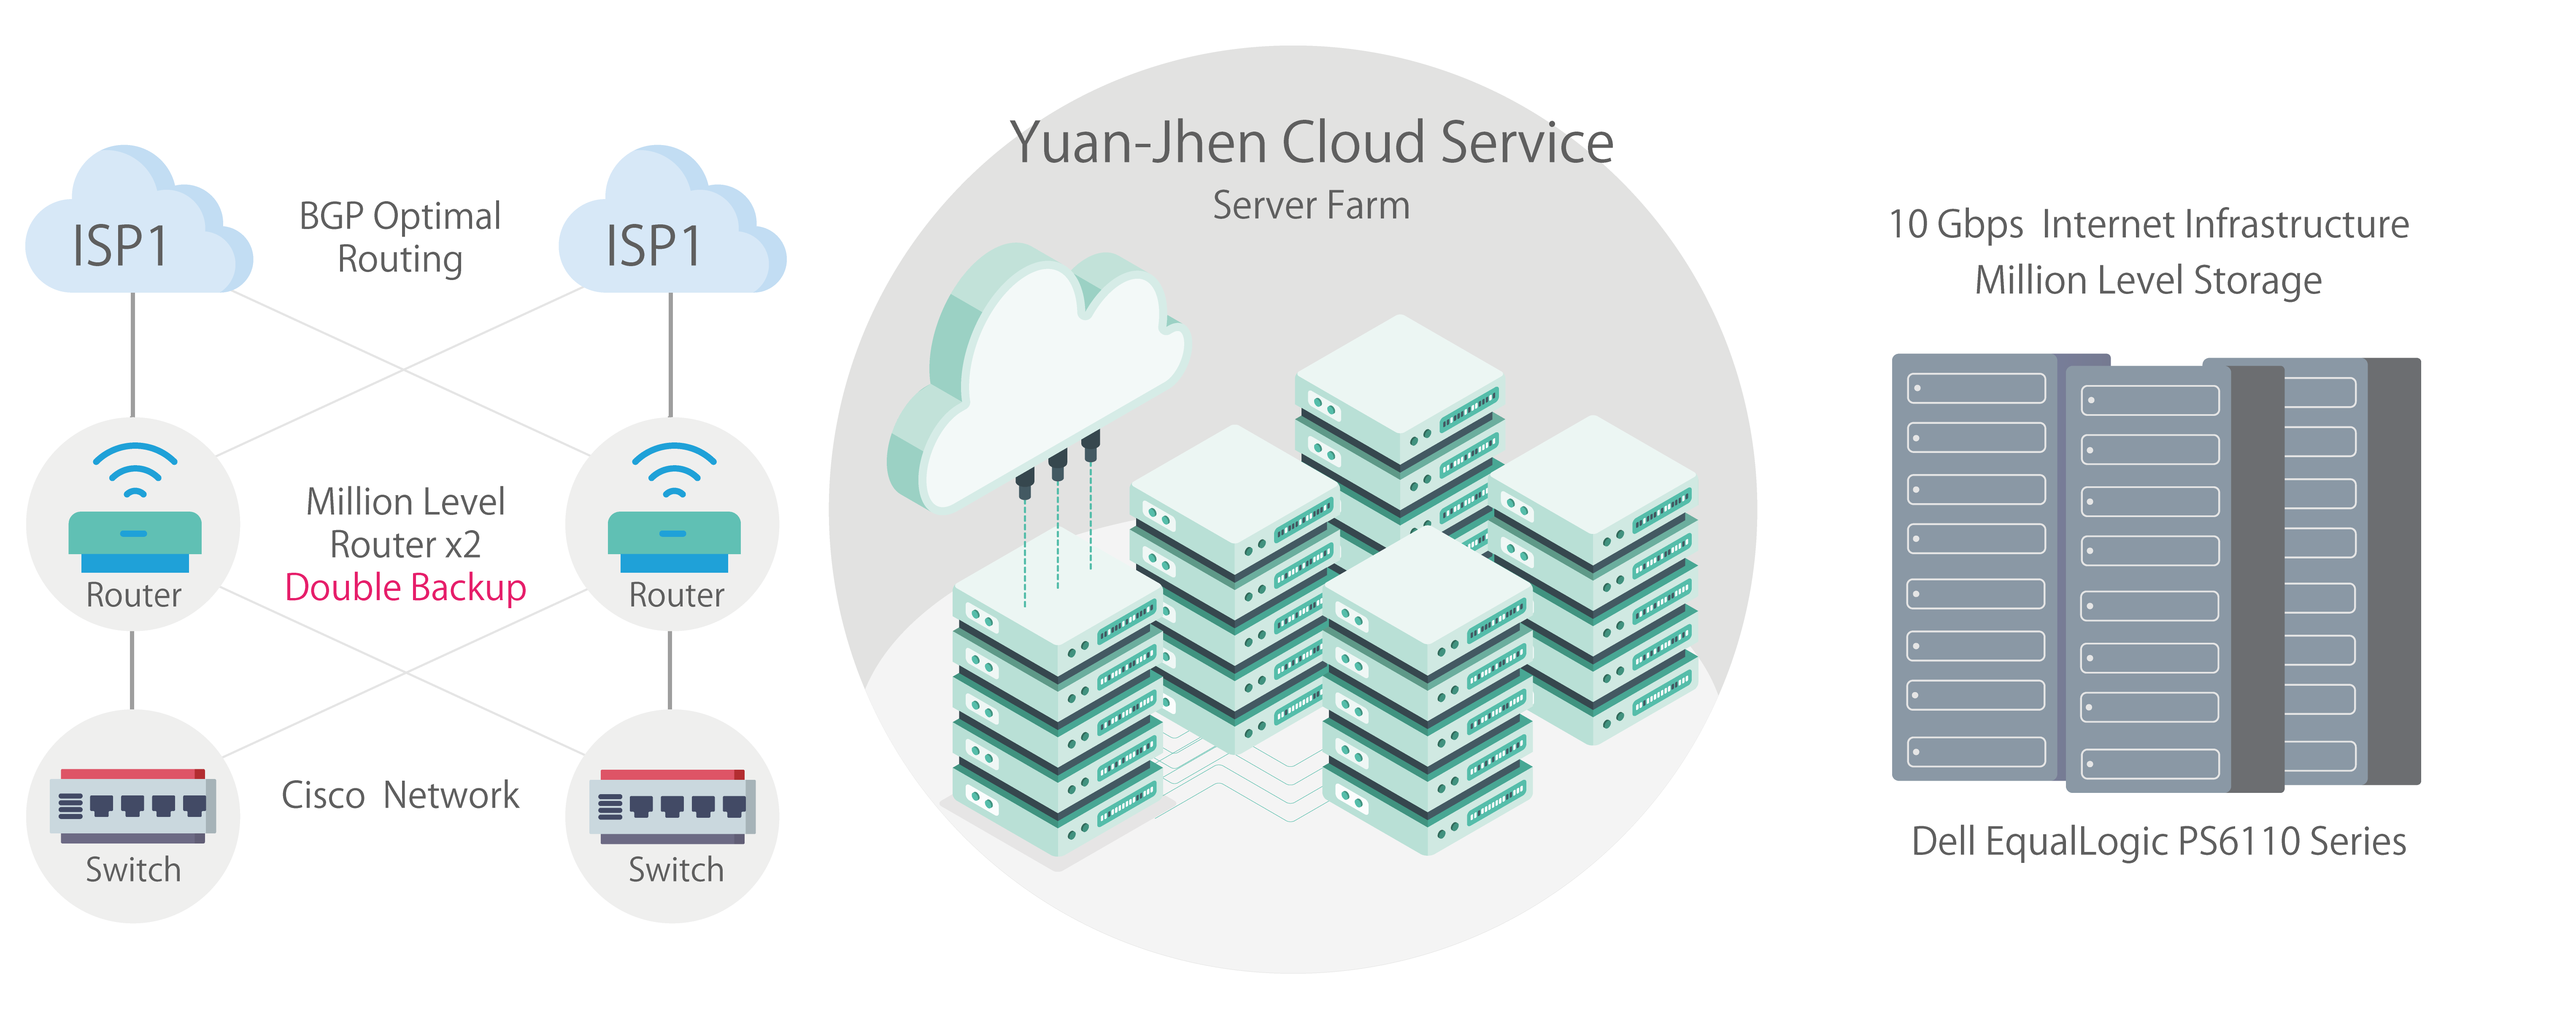 Cloud Hosting – cloud hosting services and providers｜Yuan-Jhen